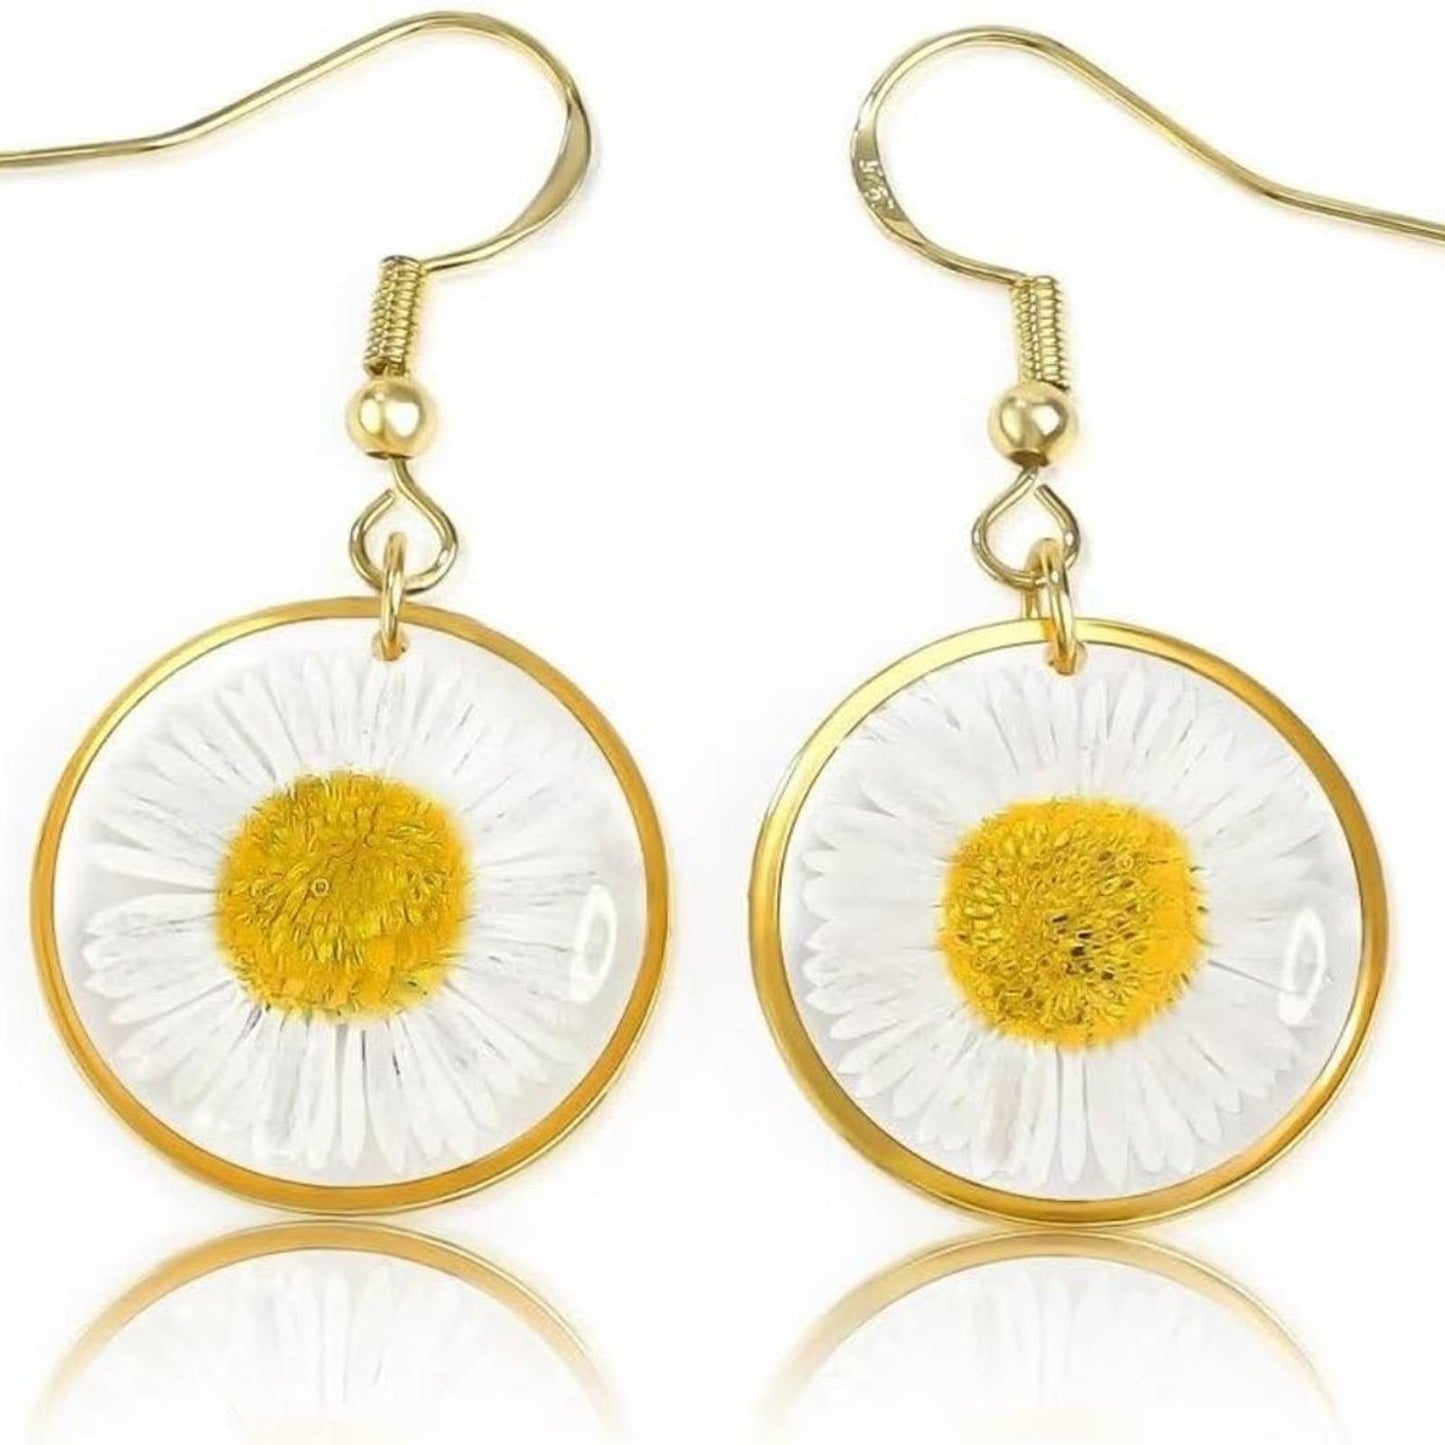 Pressed Flower Jewelry Sterling Silver Stud Earring Necklace Gift Sets Chrysanth